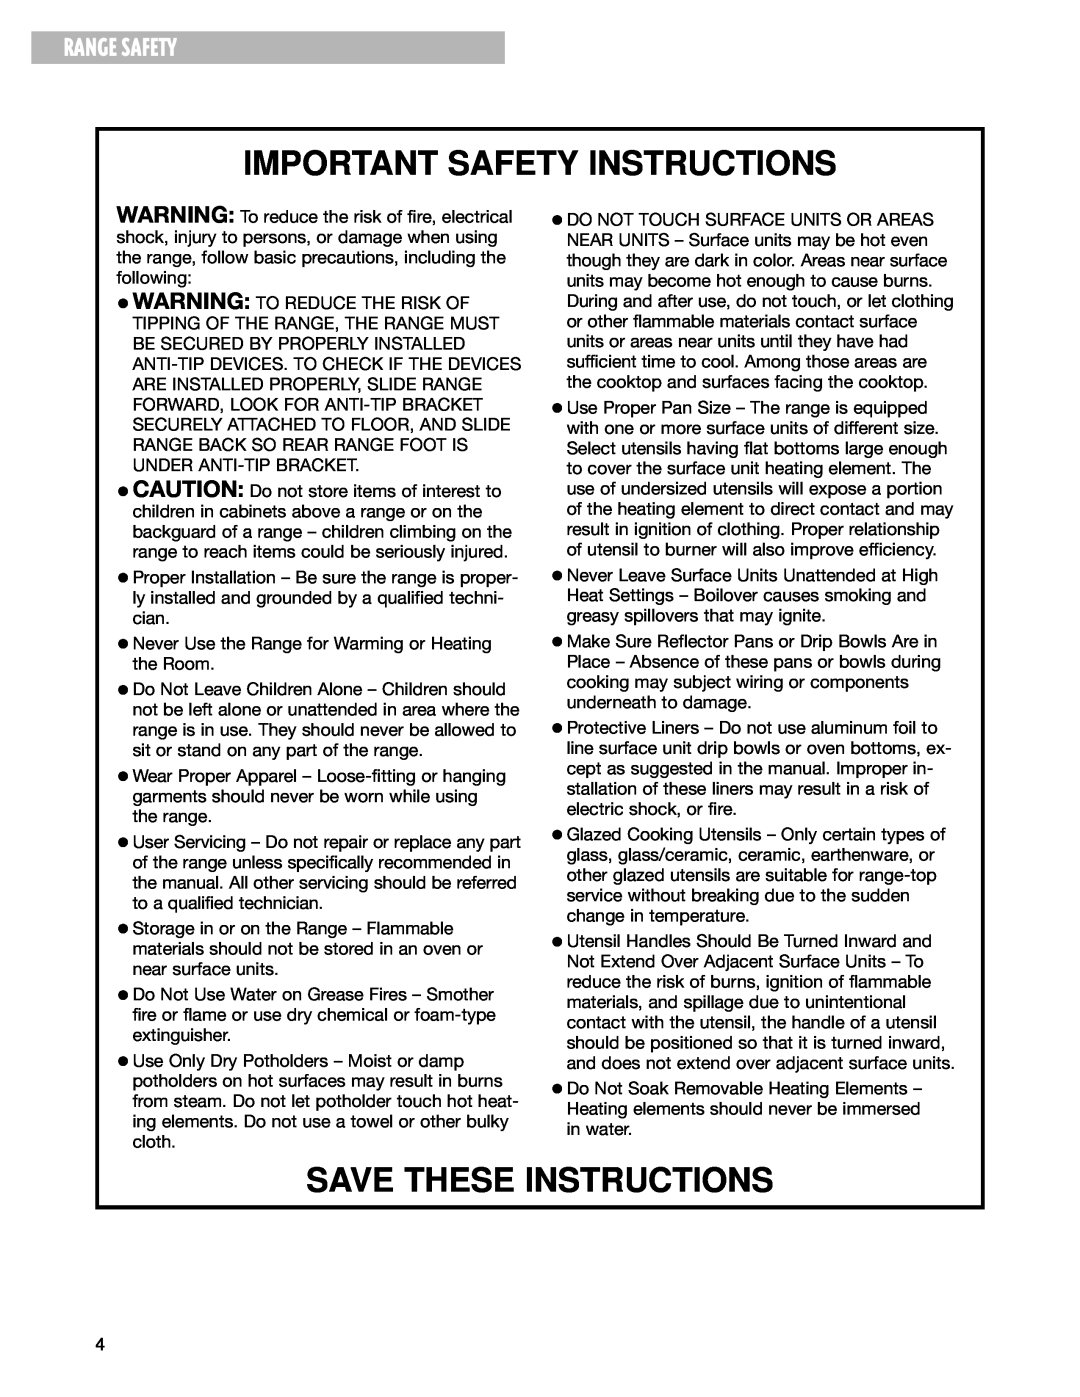 Whirlpool GR395LXG warranty Important Safety Instructions, Save These Instructions, Range Safety 